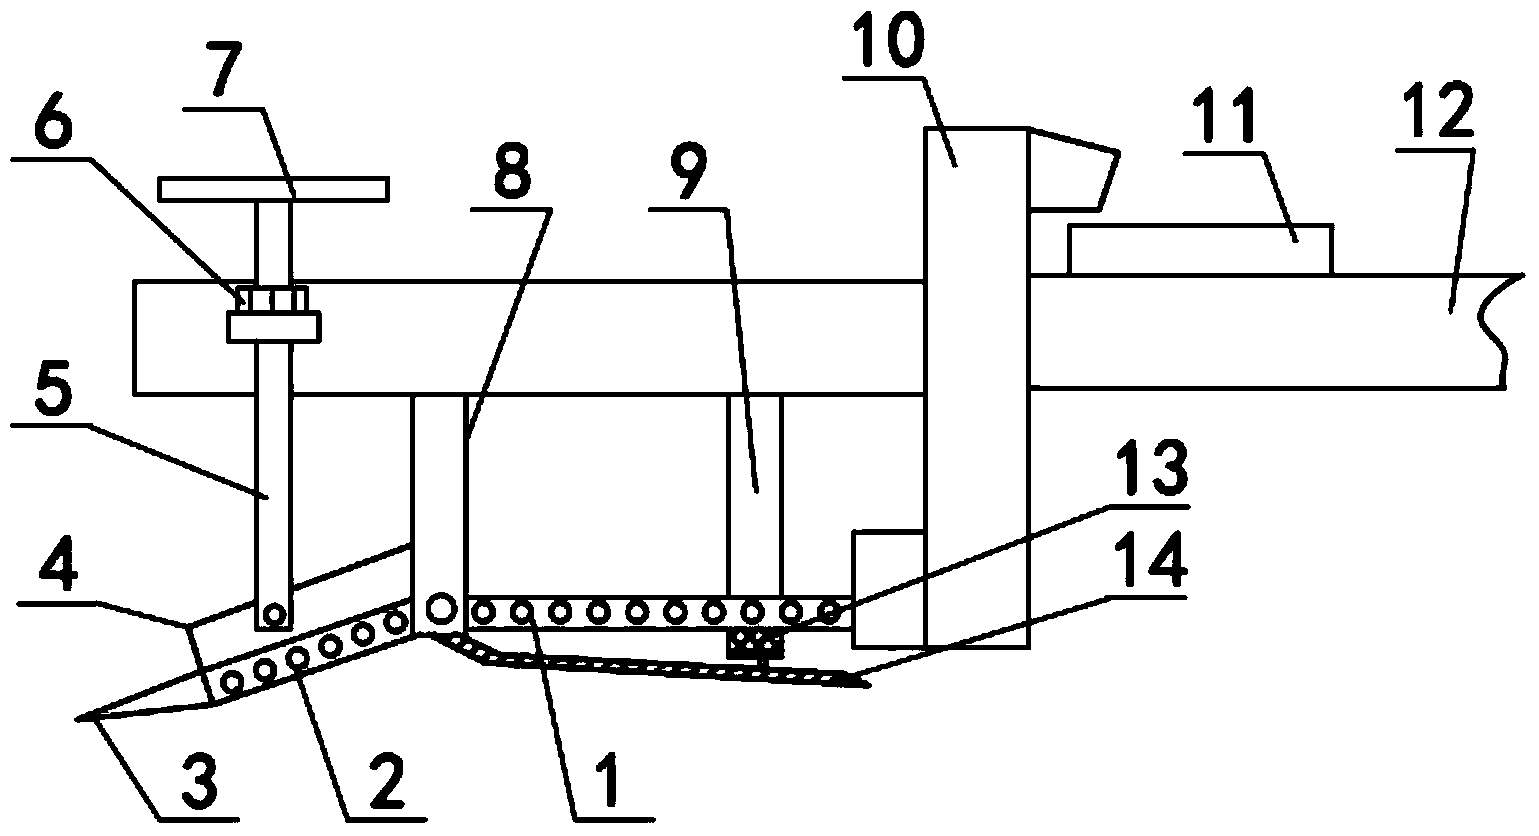 Portable excavation separation harvesting device for harvesting potatoes